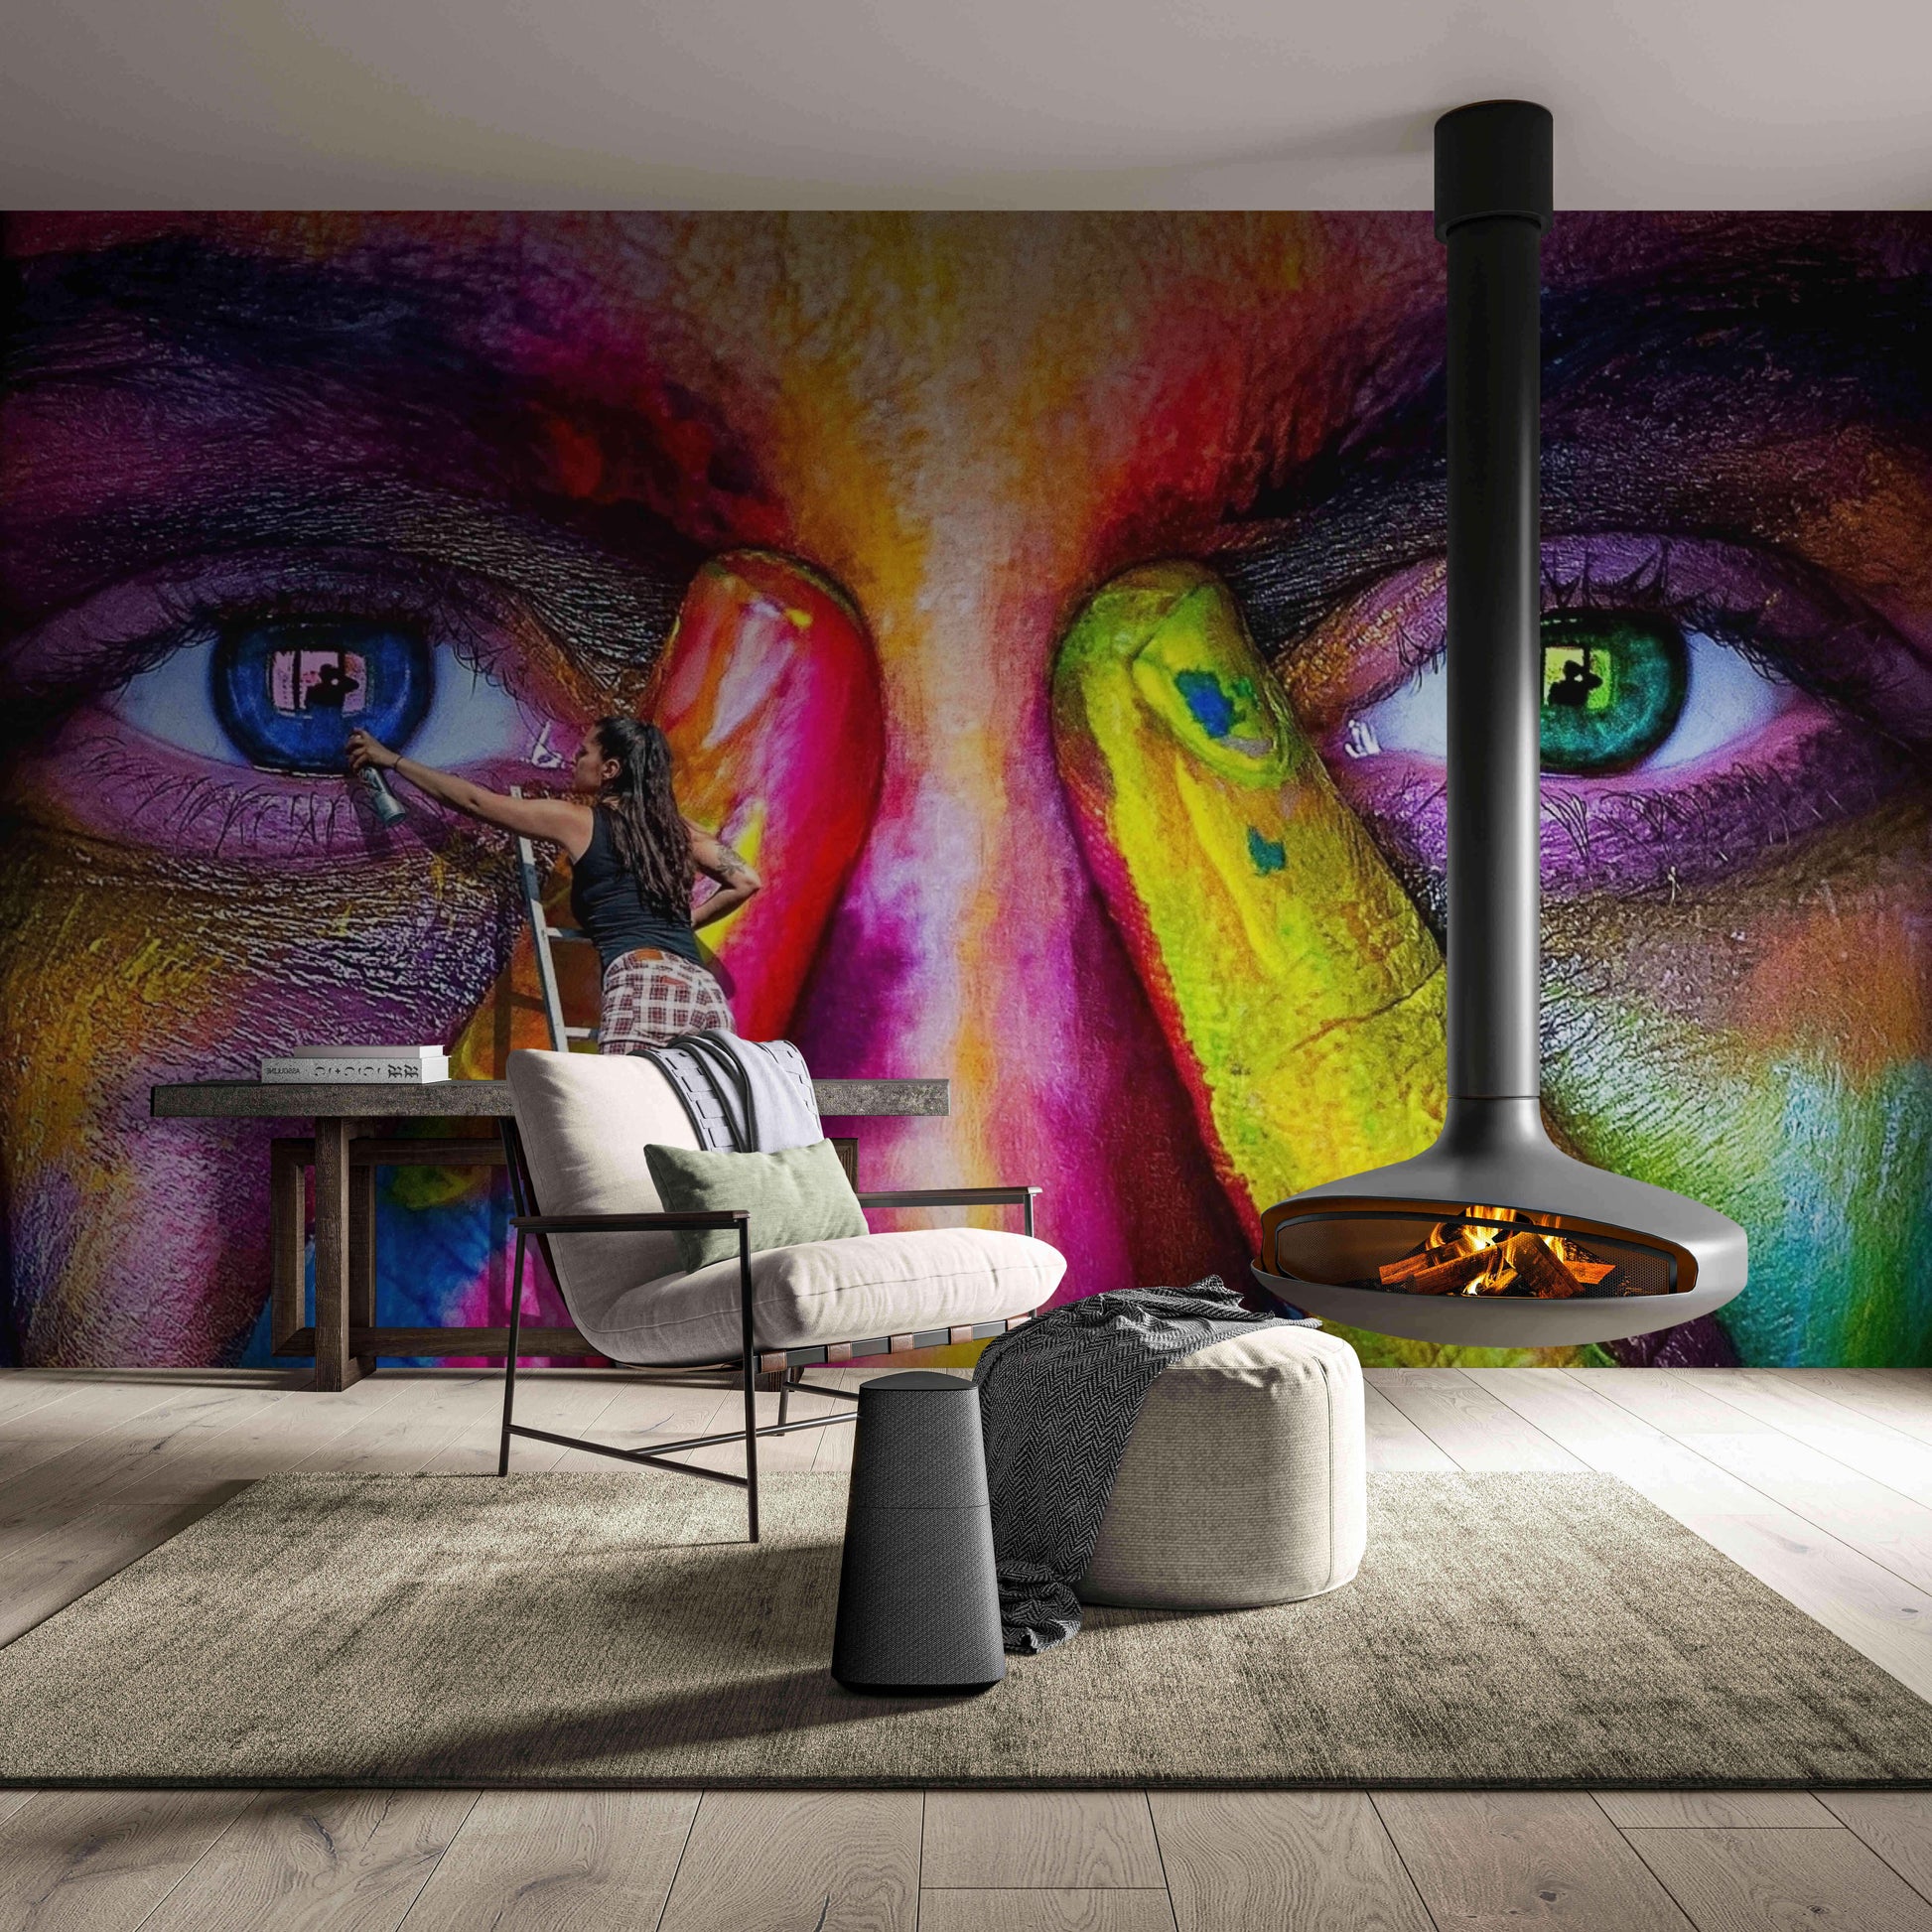 Dynamic artistry in removable graffiti wallpaper, perfect for transformative spaces.